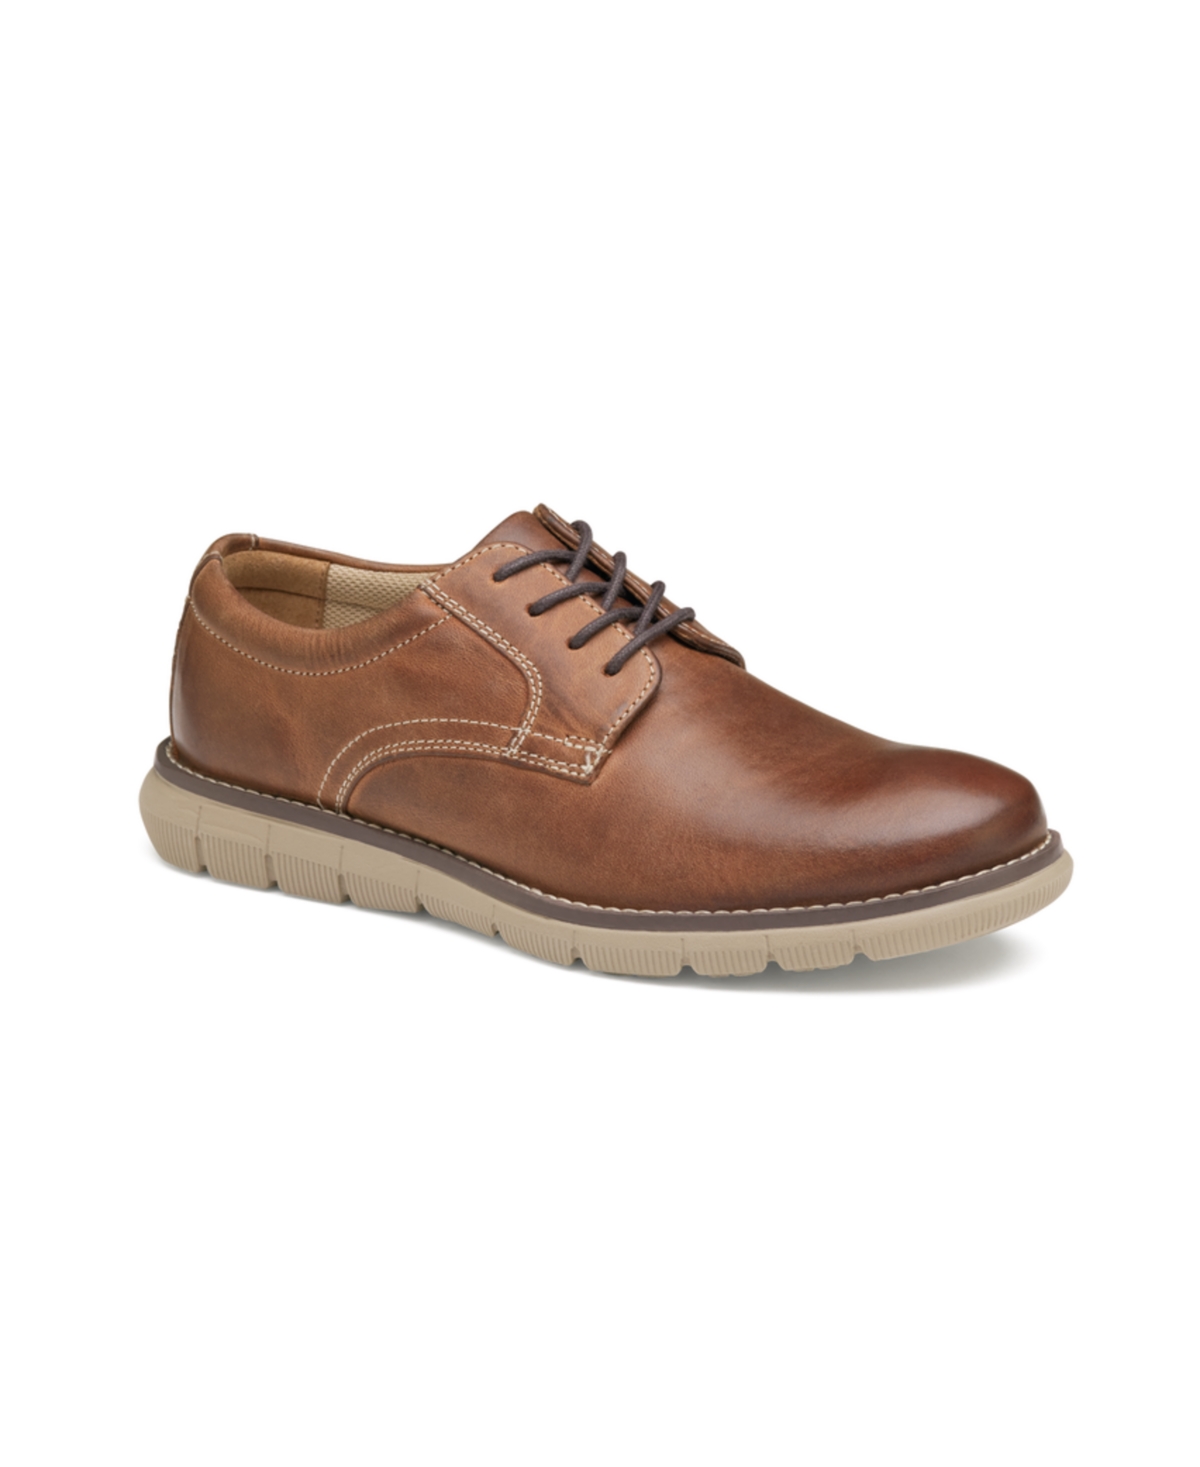 Johnston & Murphy Holden Plain Toe Derby In Brown Leather